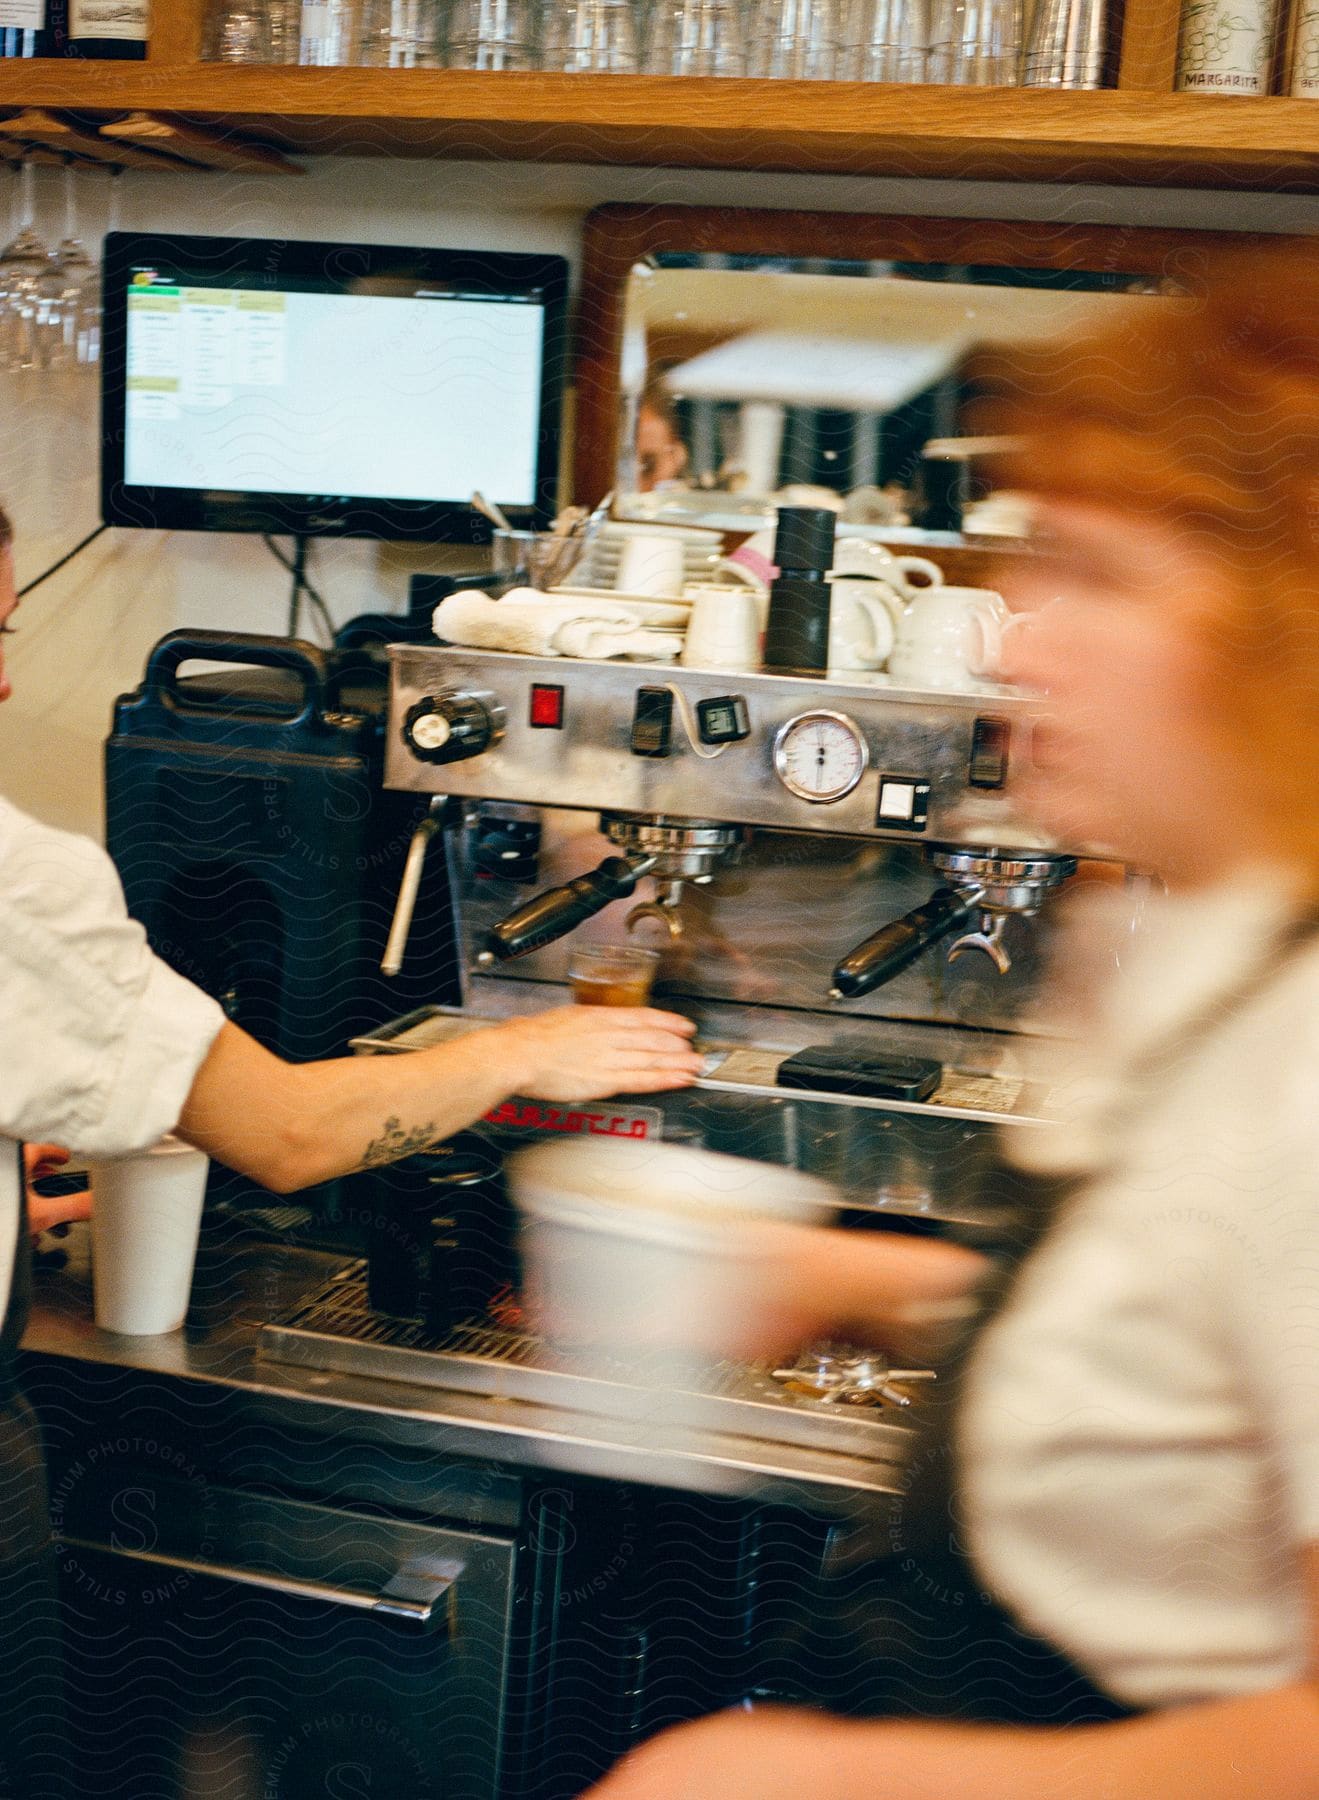 Blurry image of two people working at a coffee shop.